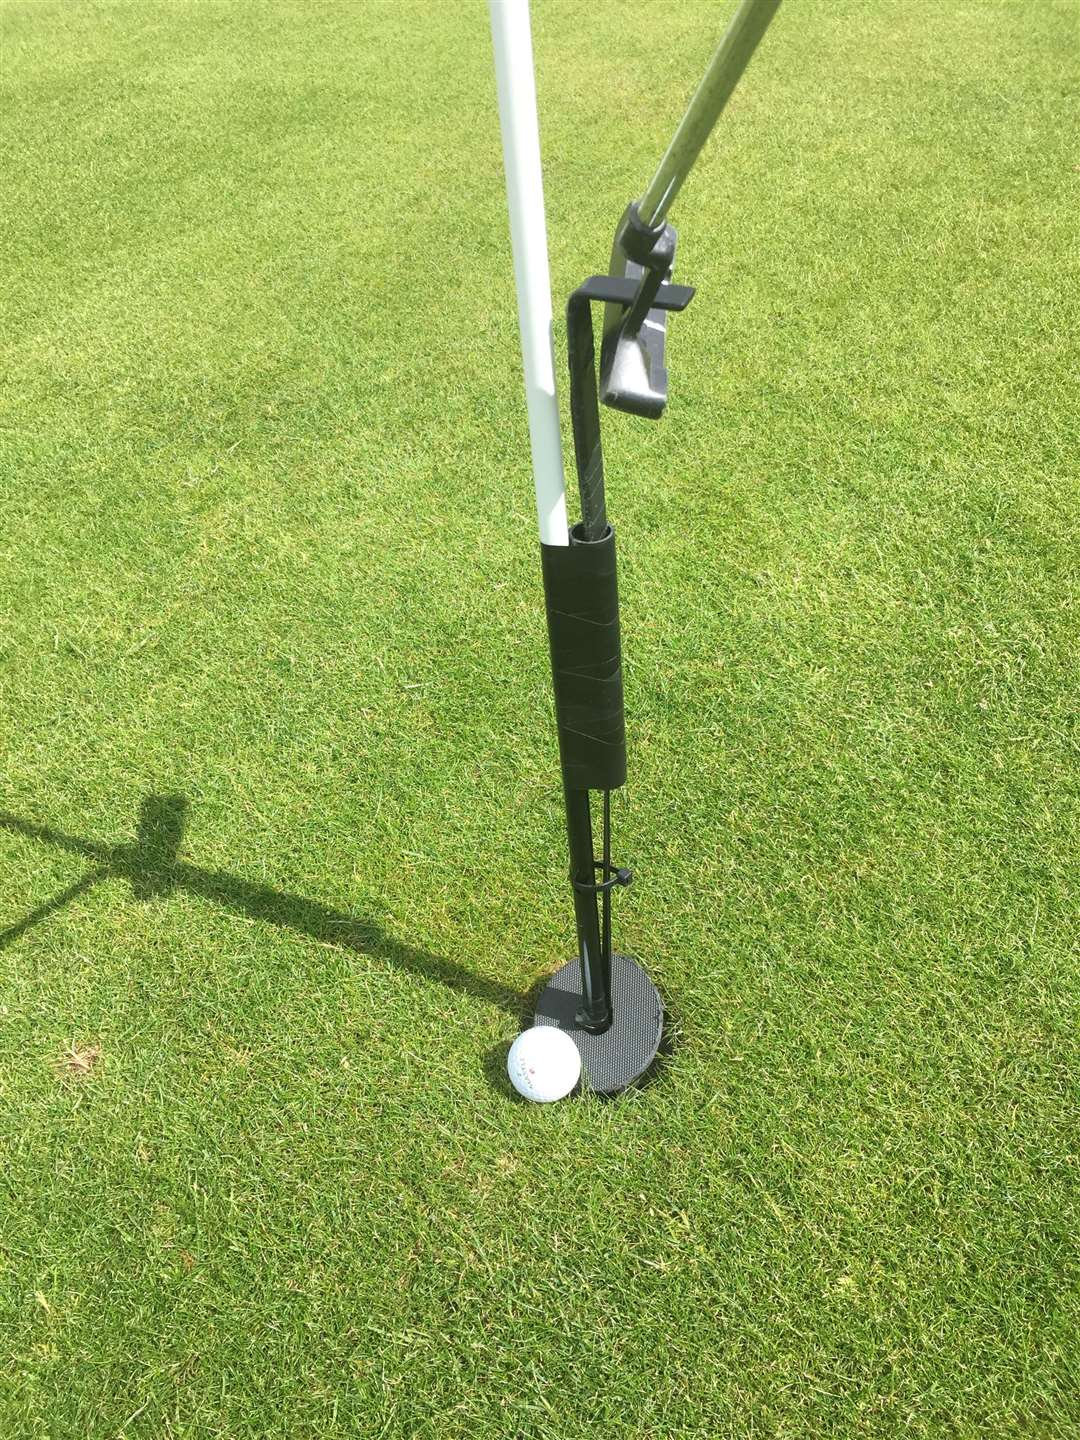 A close-up of the new golf ball lifter designed by Hunter's Promotions Ltd, and gifted to the four Caithness golf clubs as well as Durness.